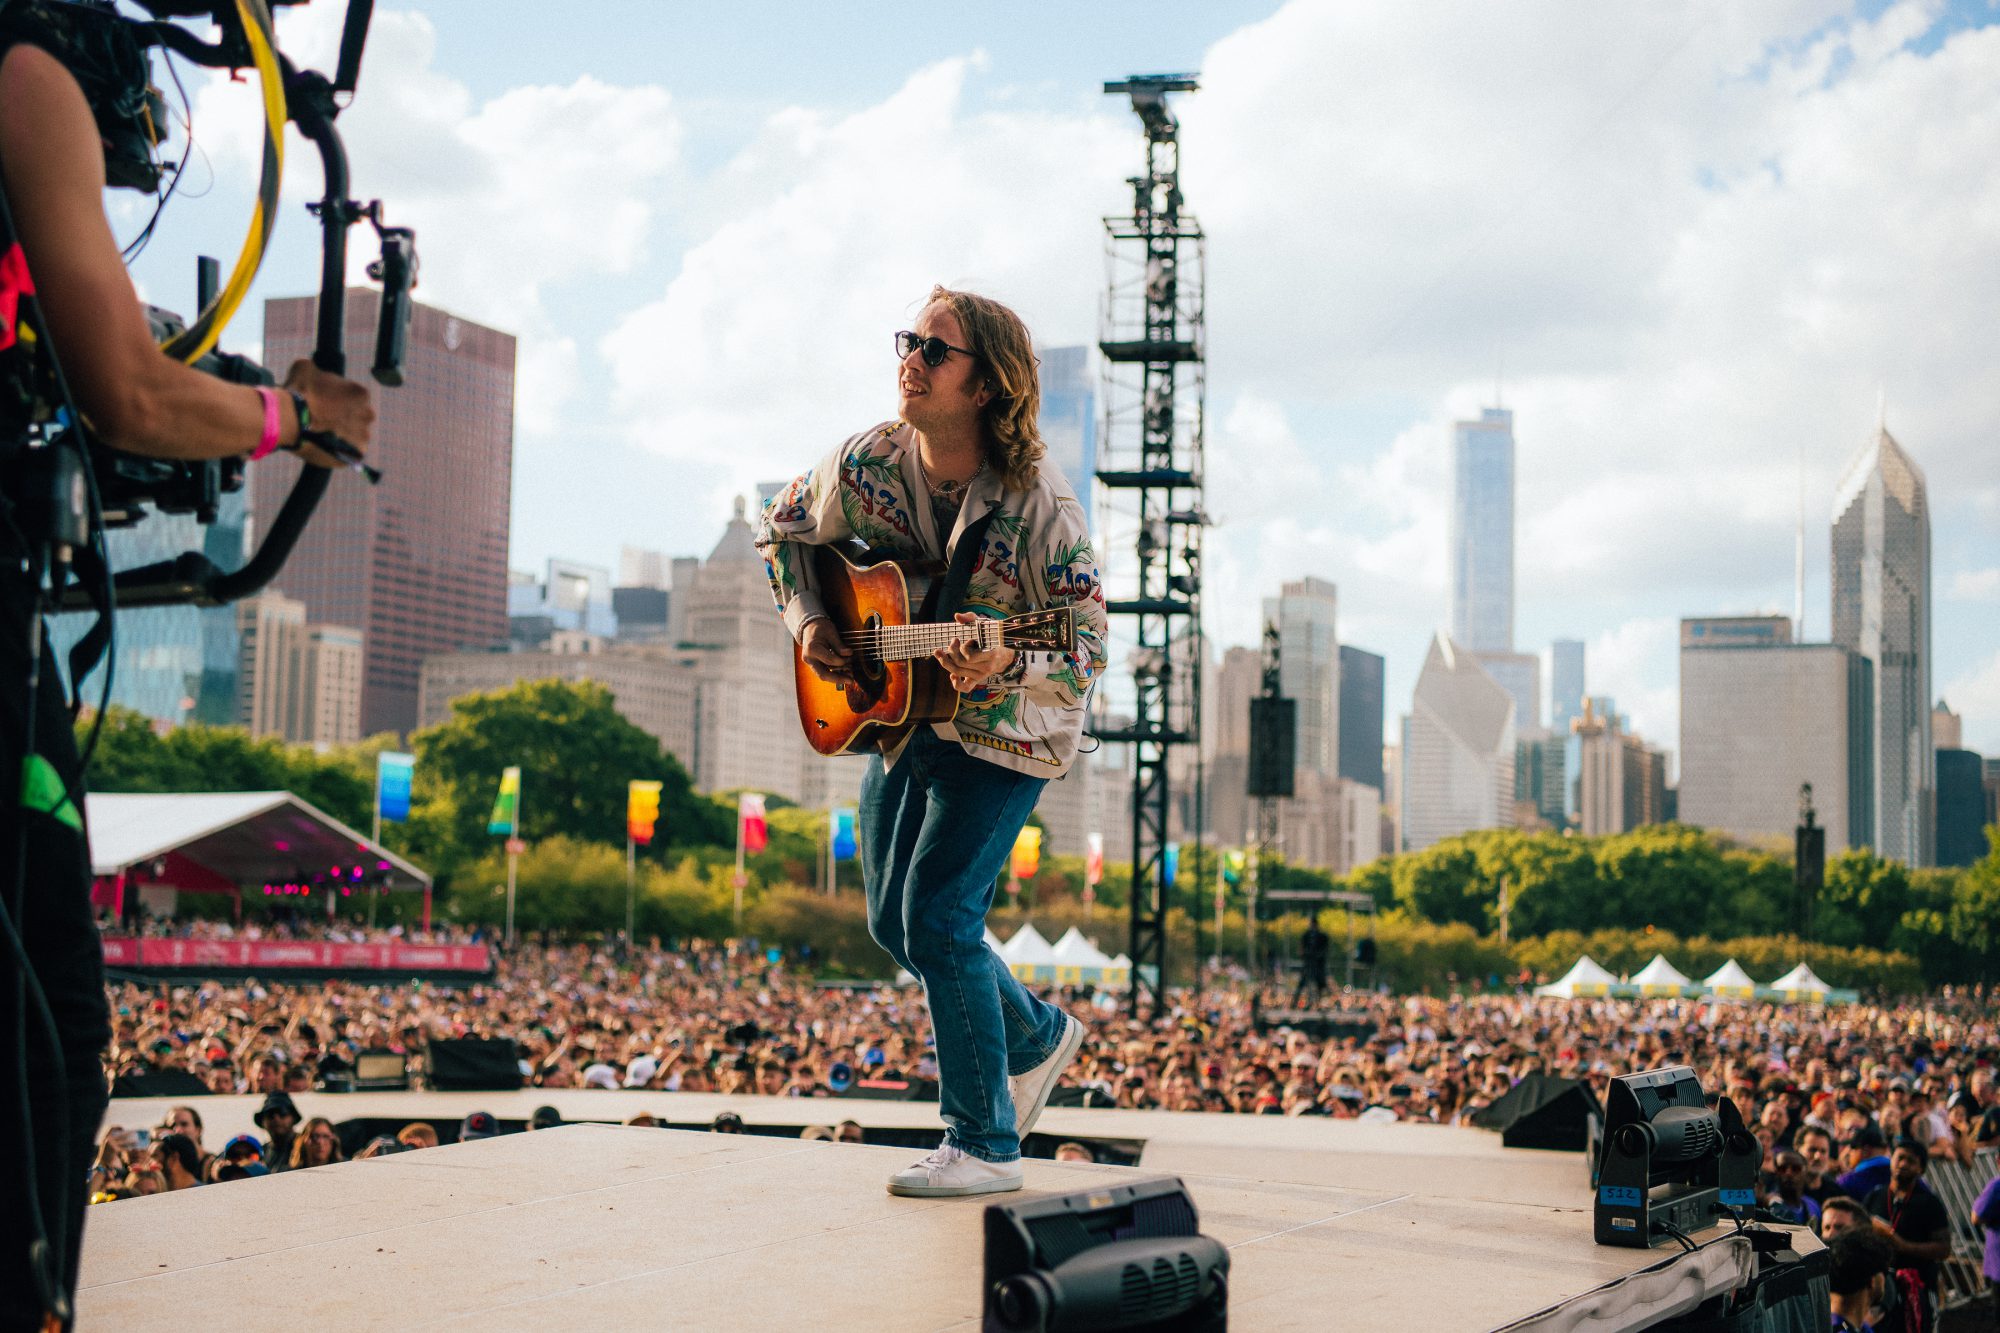 Billy Strings by Charles Reagan for Lollapalooza 2022